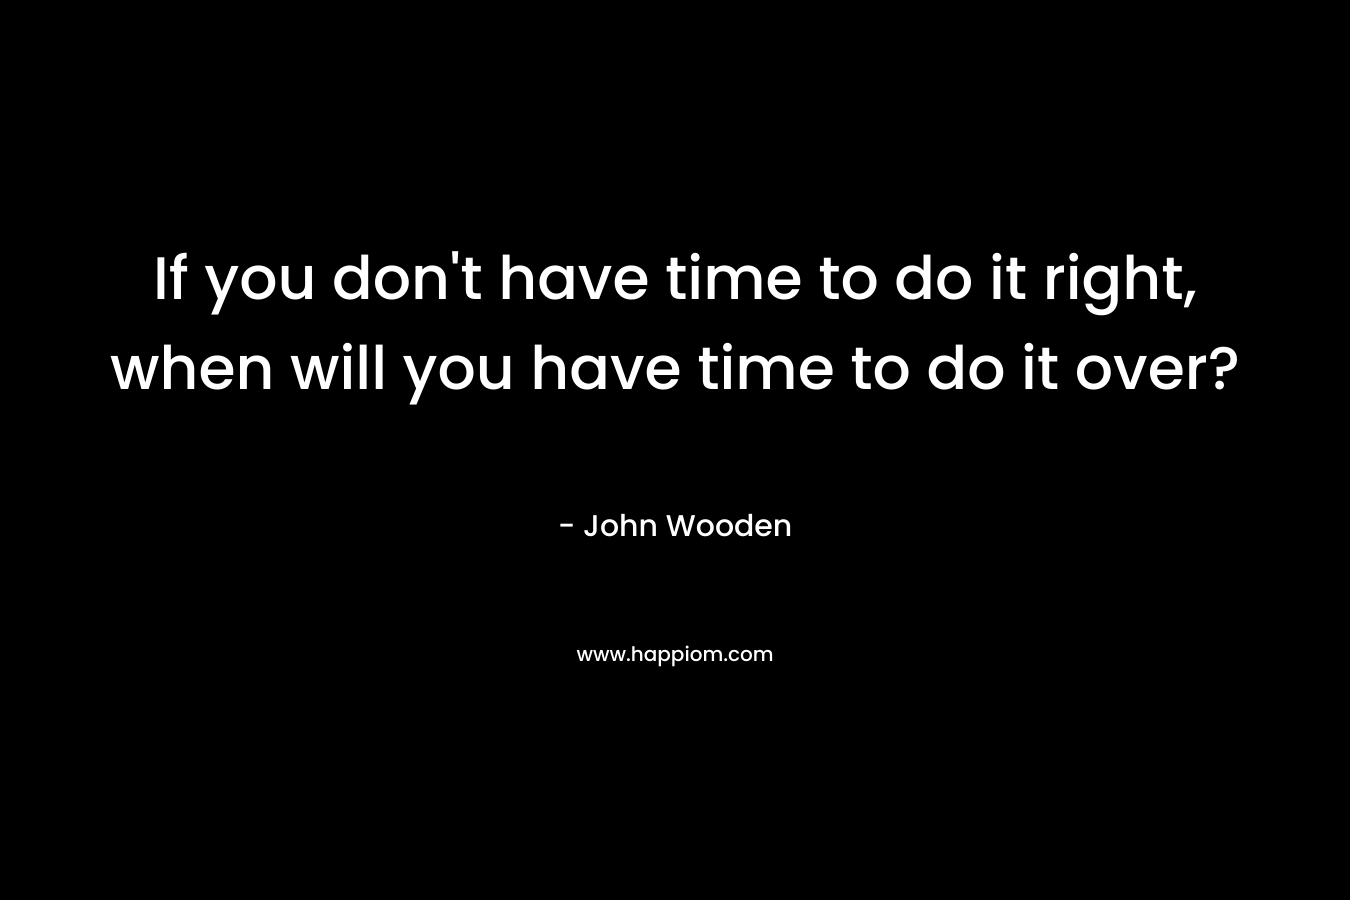 If you don’t have time to do it right, when will you have time to do it over? – John Wooden